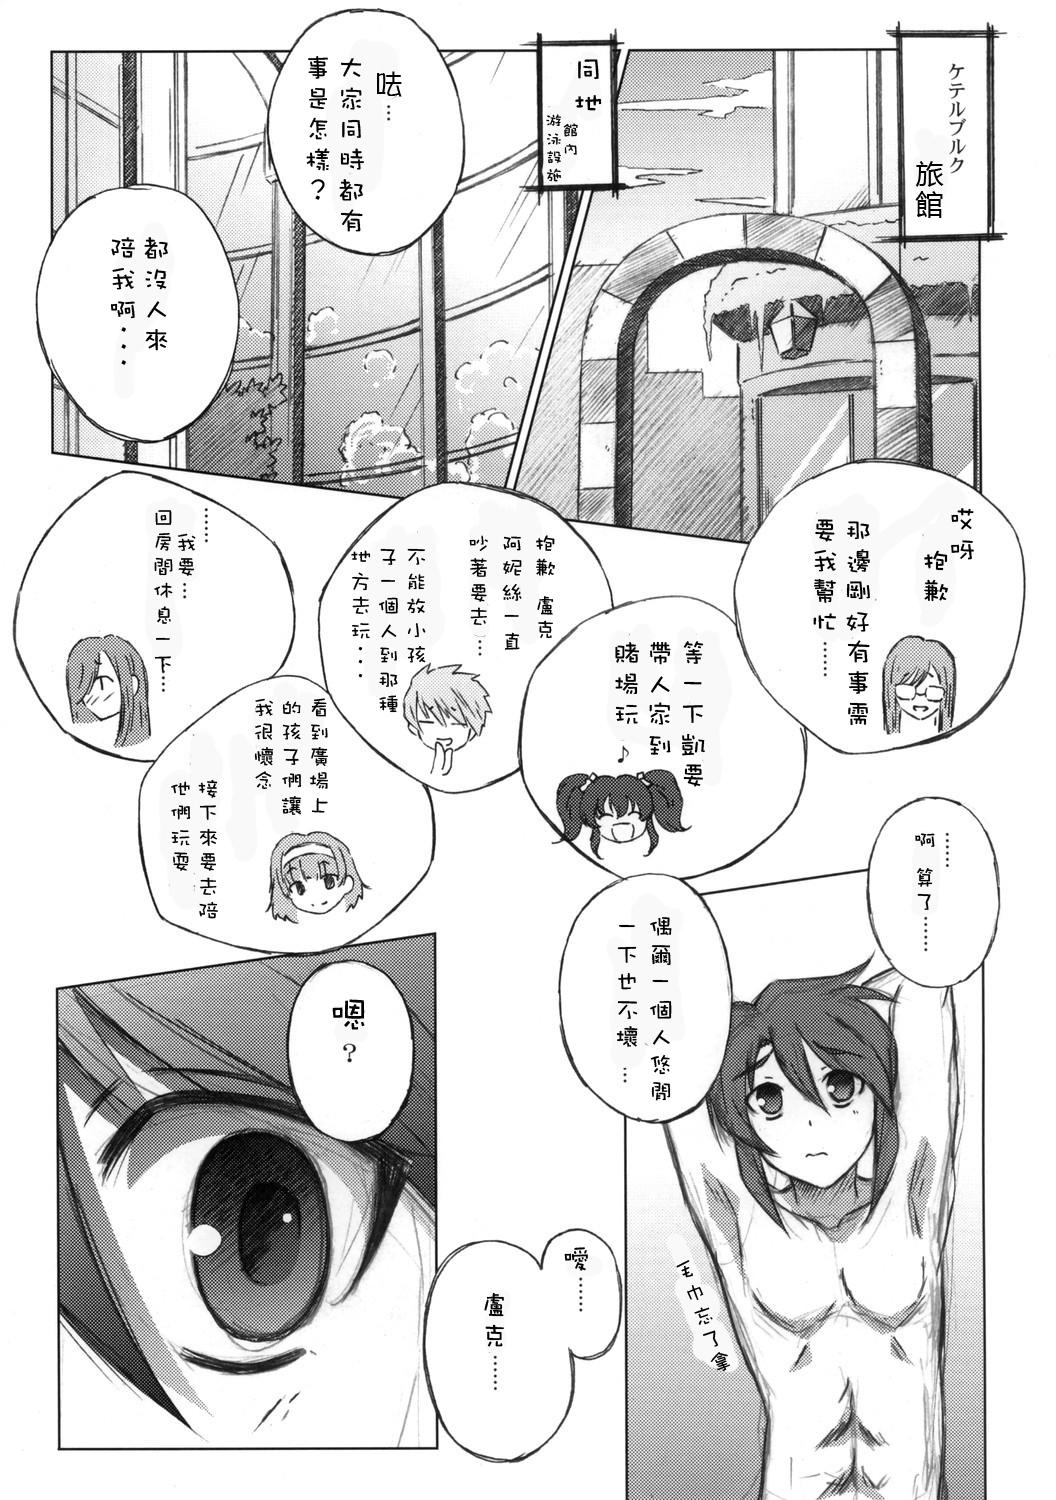 Classy Melon ni Melon Melon - Tales of the abyss Spooning - Page 4